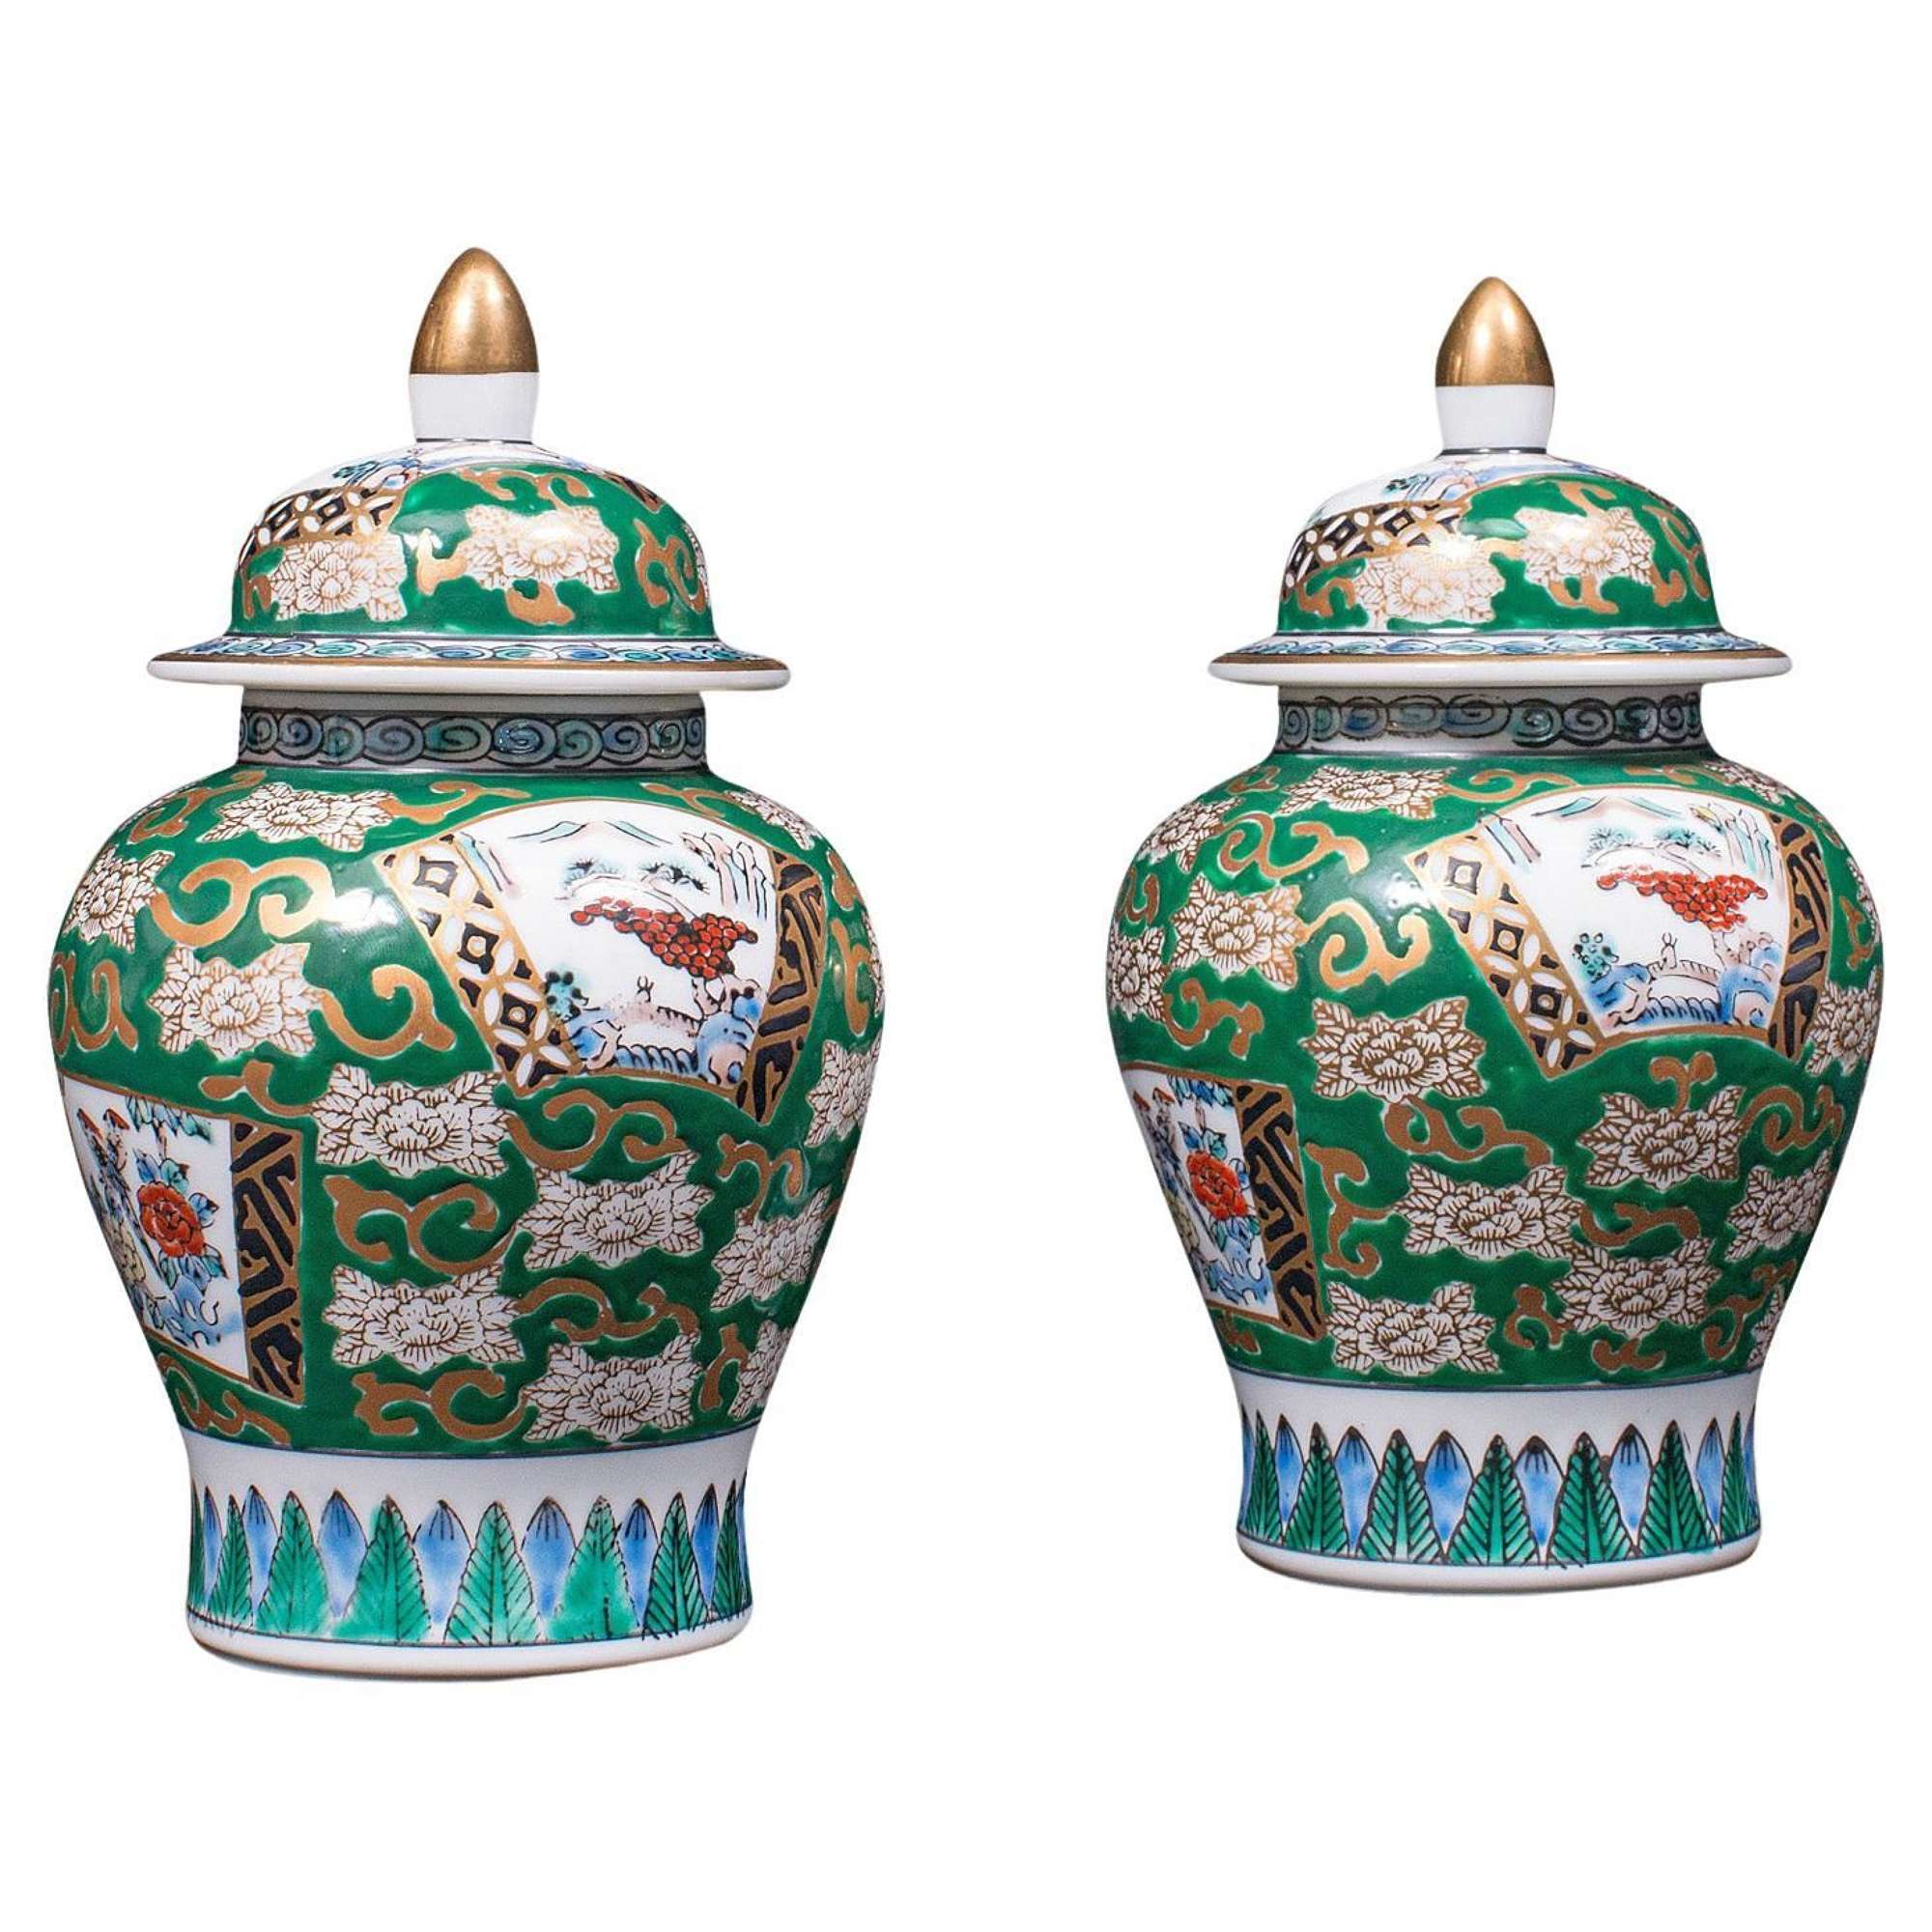 Pair Of Vintage Ginger Jars, Chinese, Hand Painted, Ceramic, Spice Pot, Art Deco